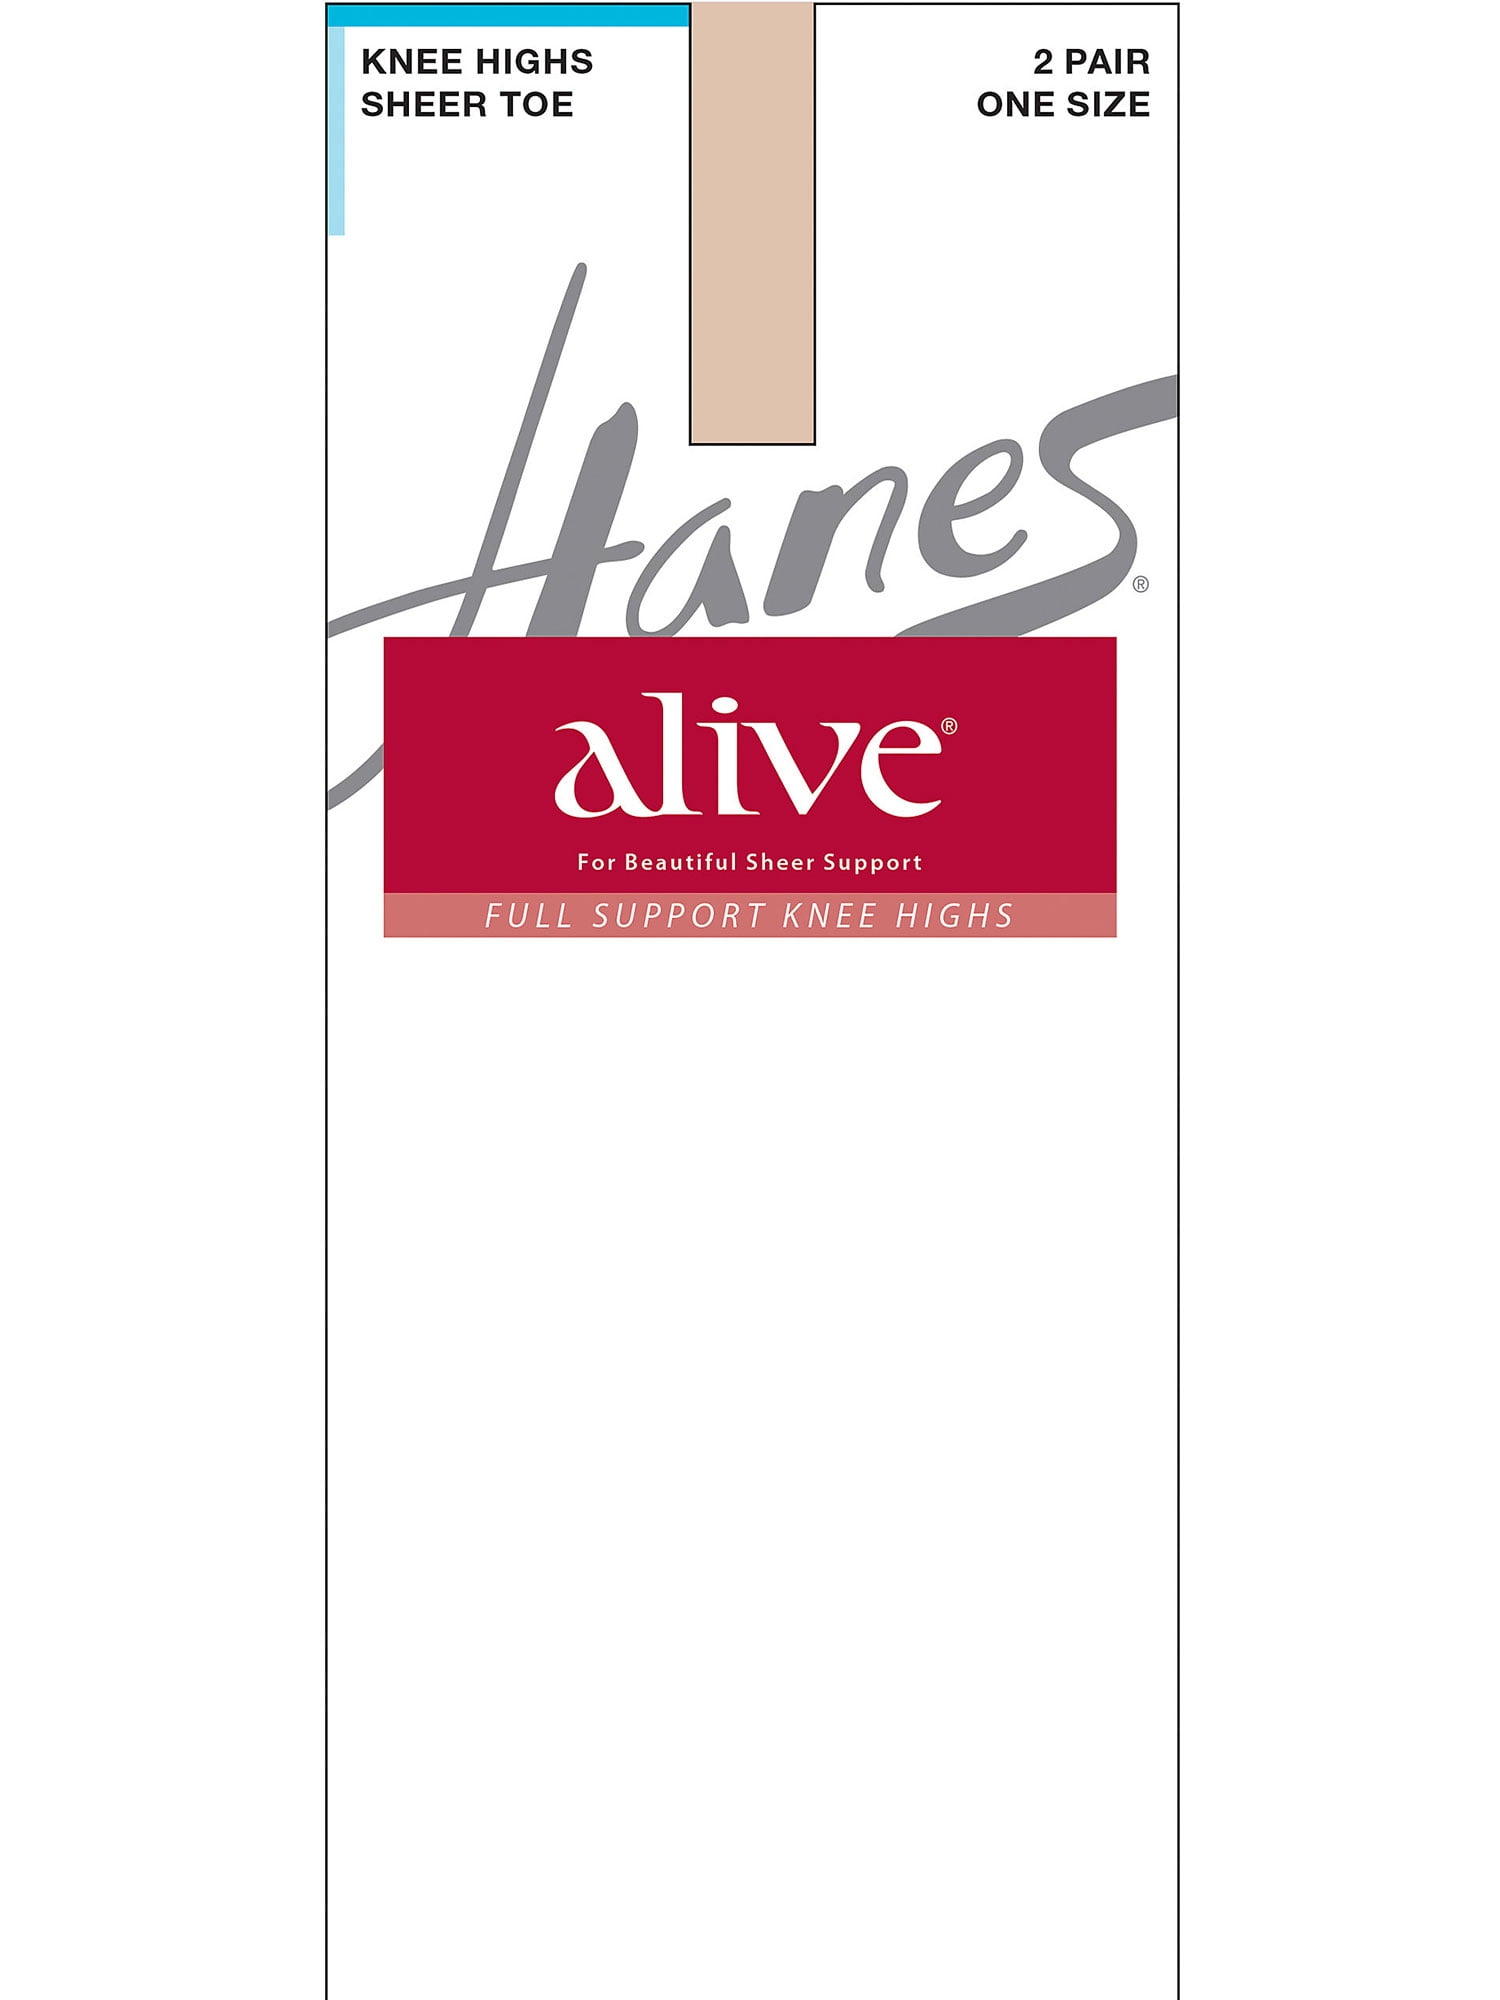 Hanes Alive Full Support Sheer Knee Highs 2-Pack Barely There ONE SIZE  Women's